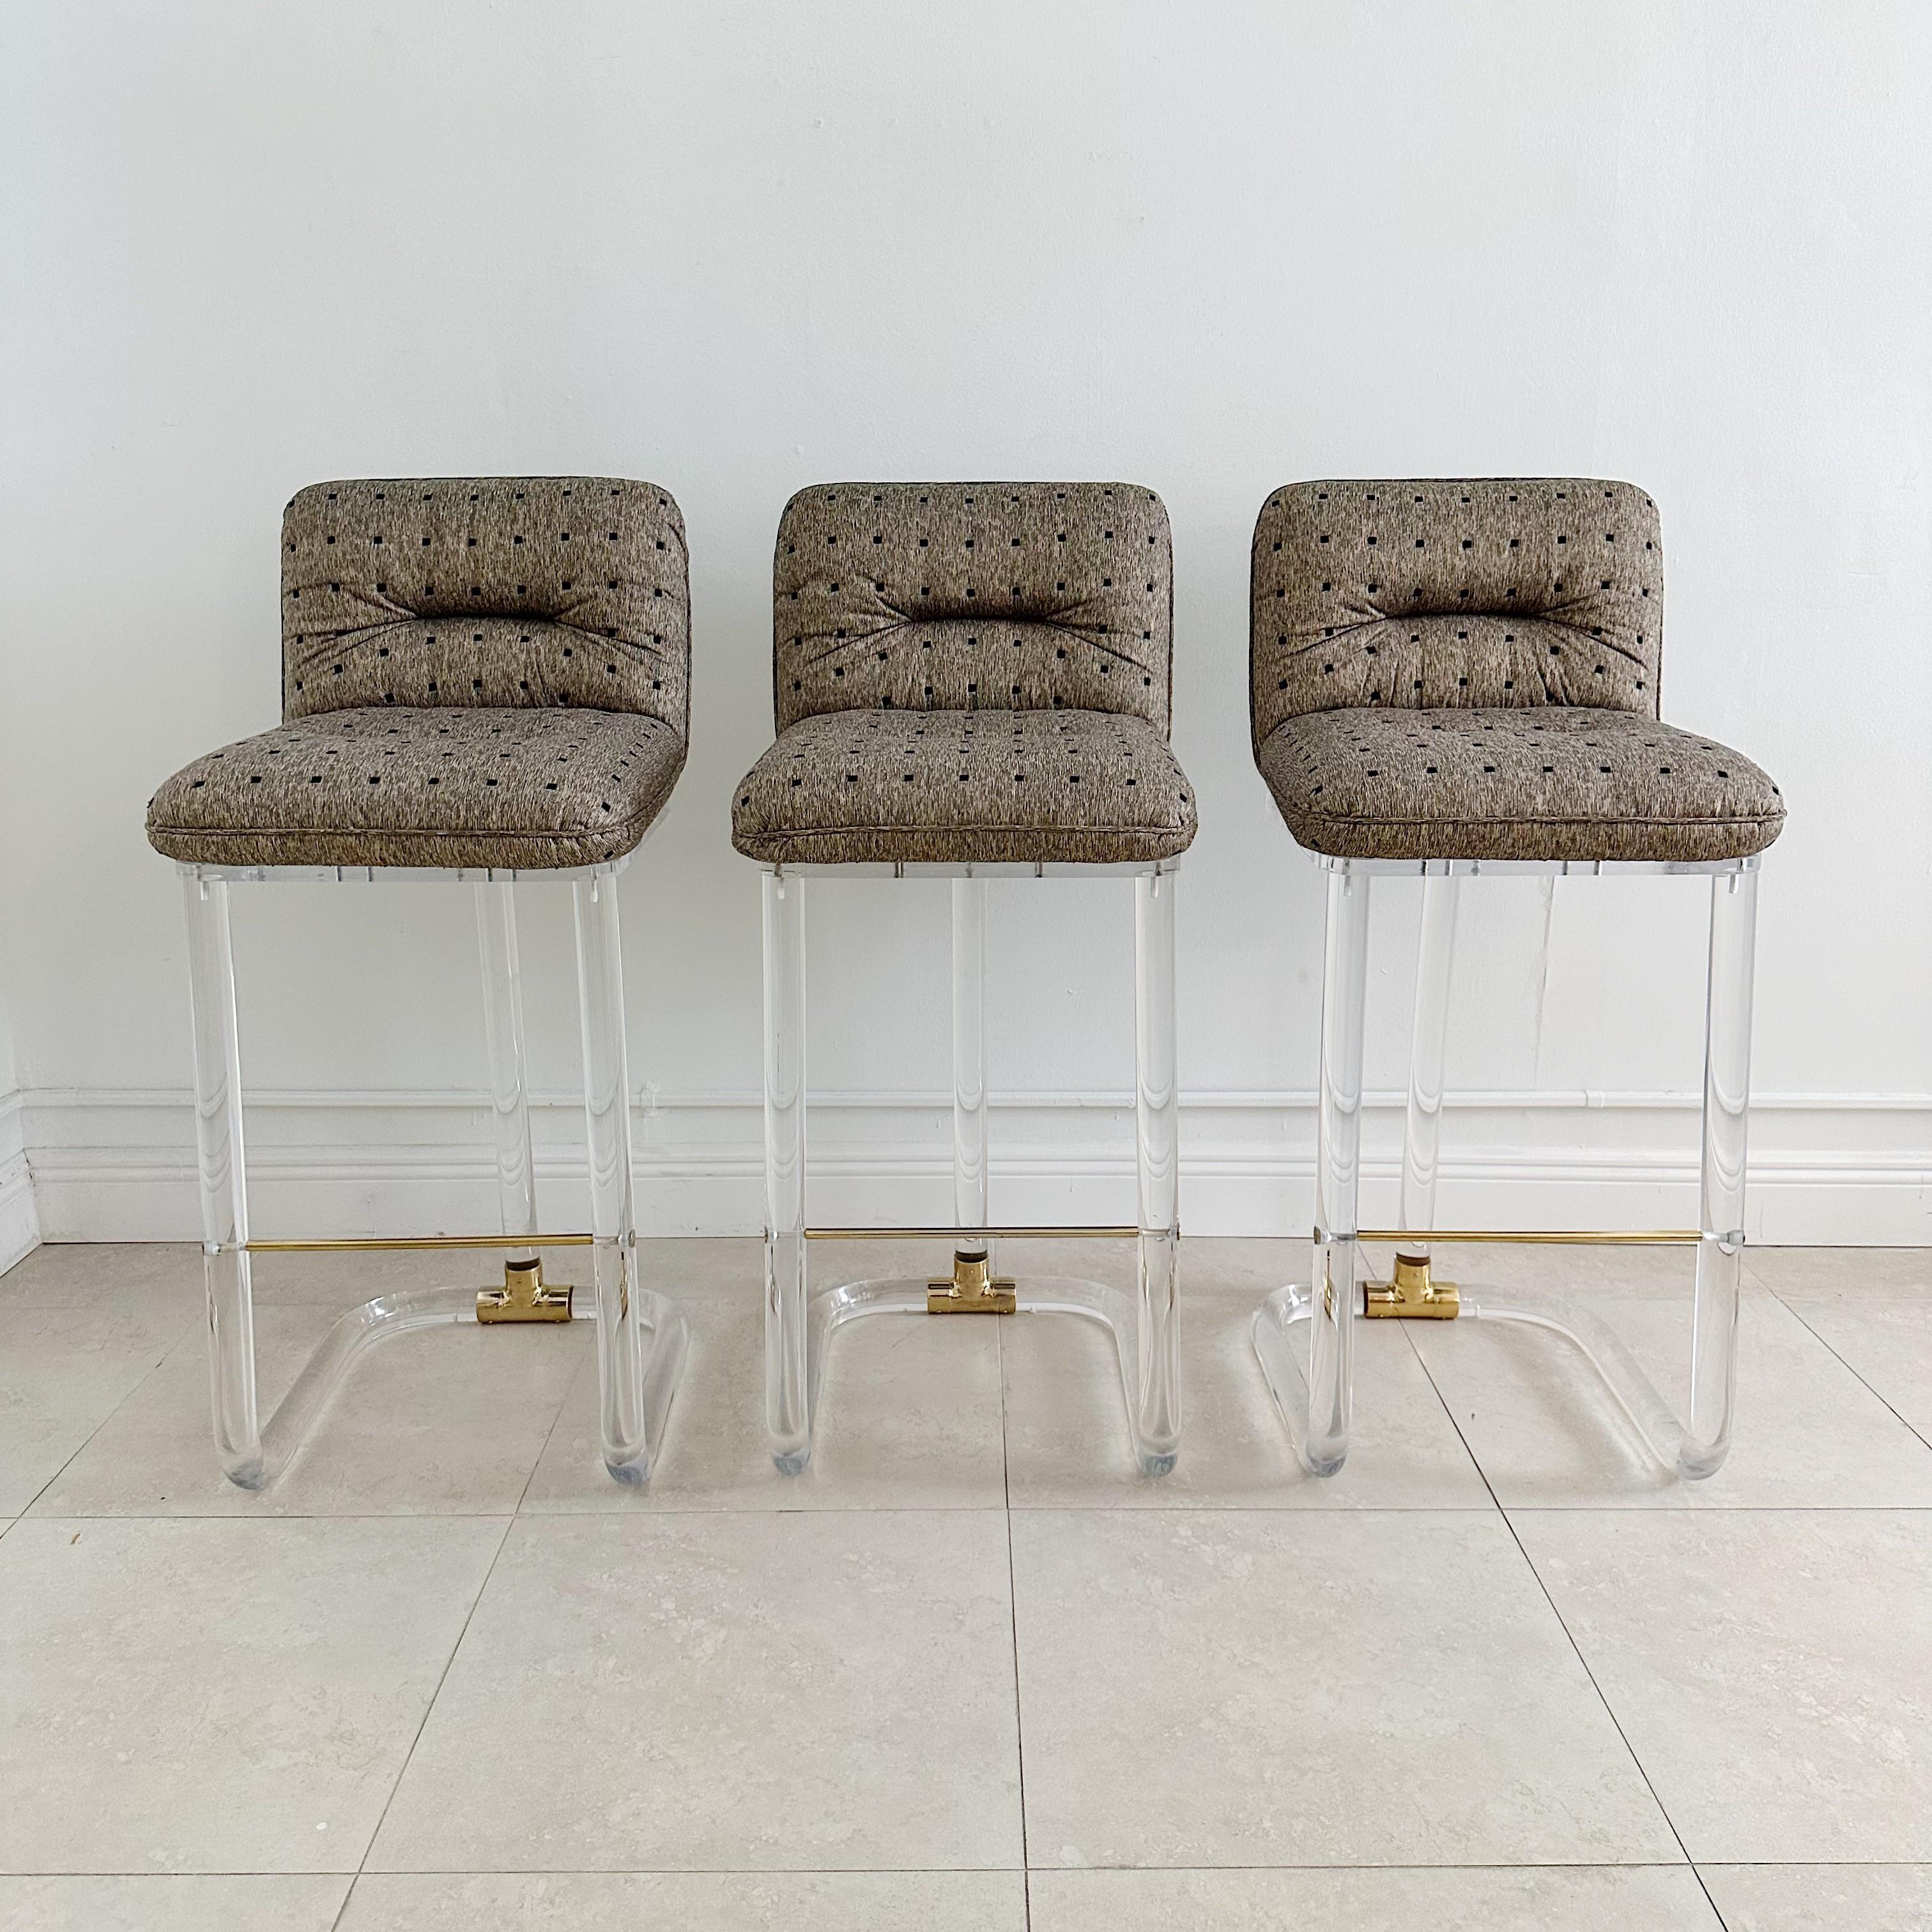 Set of six lucite and brass swivel bar stools by Leon Frost for Lion in Frost, circa 1970s. Featuring a curved tubular lucite bar frame, the seats still have the original upholstery which is in excellent condition. The stools are adorned with brass